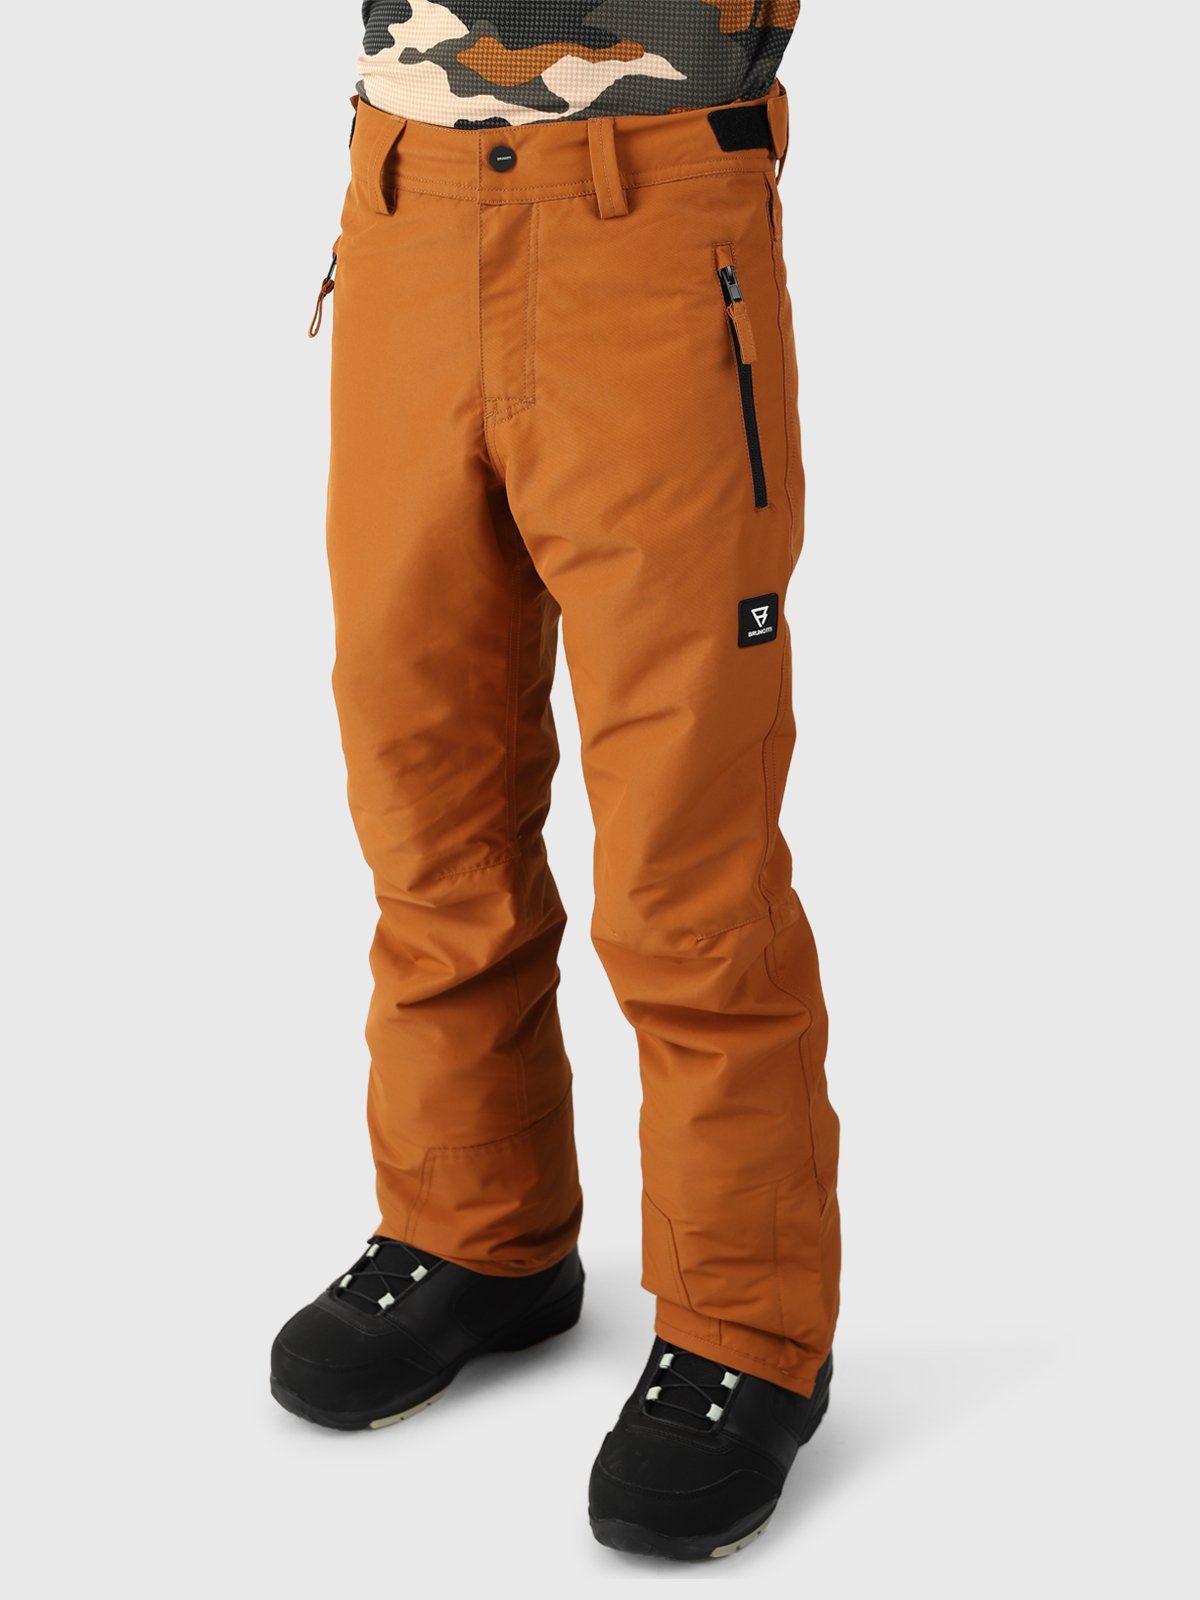 Footraily Boys Snow Skihose Brunotti TABACCO Pant